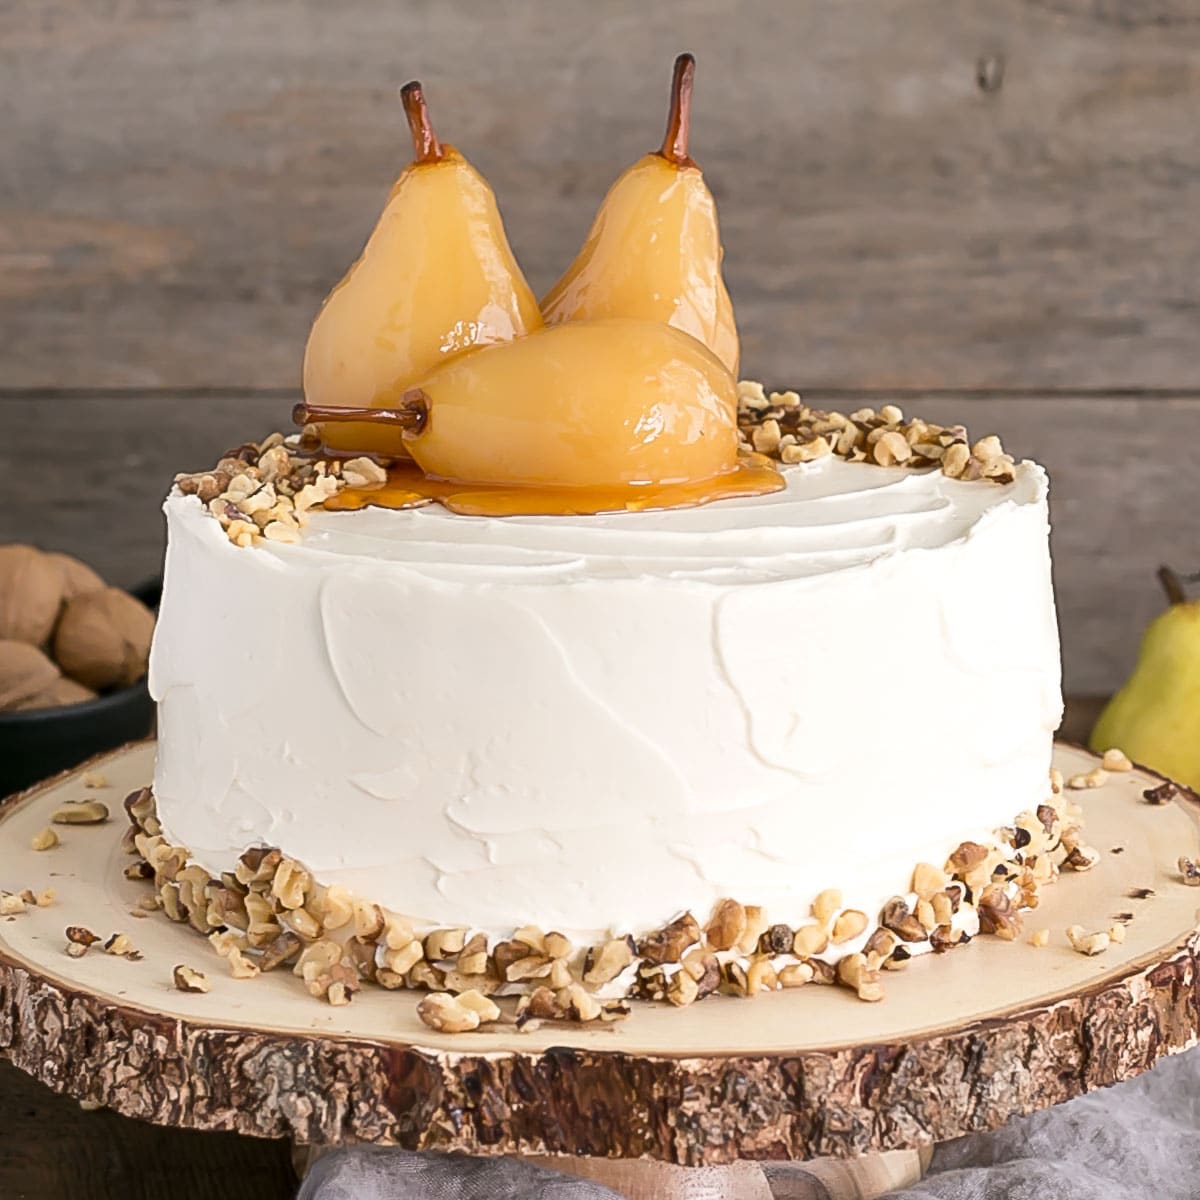 Walnut cake with poached pears on top on a rustic wooden cake stand.